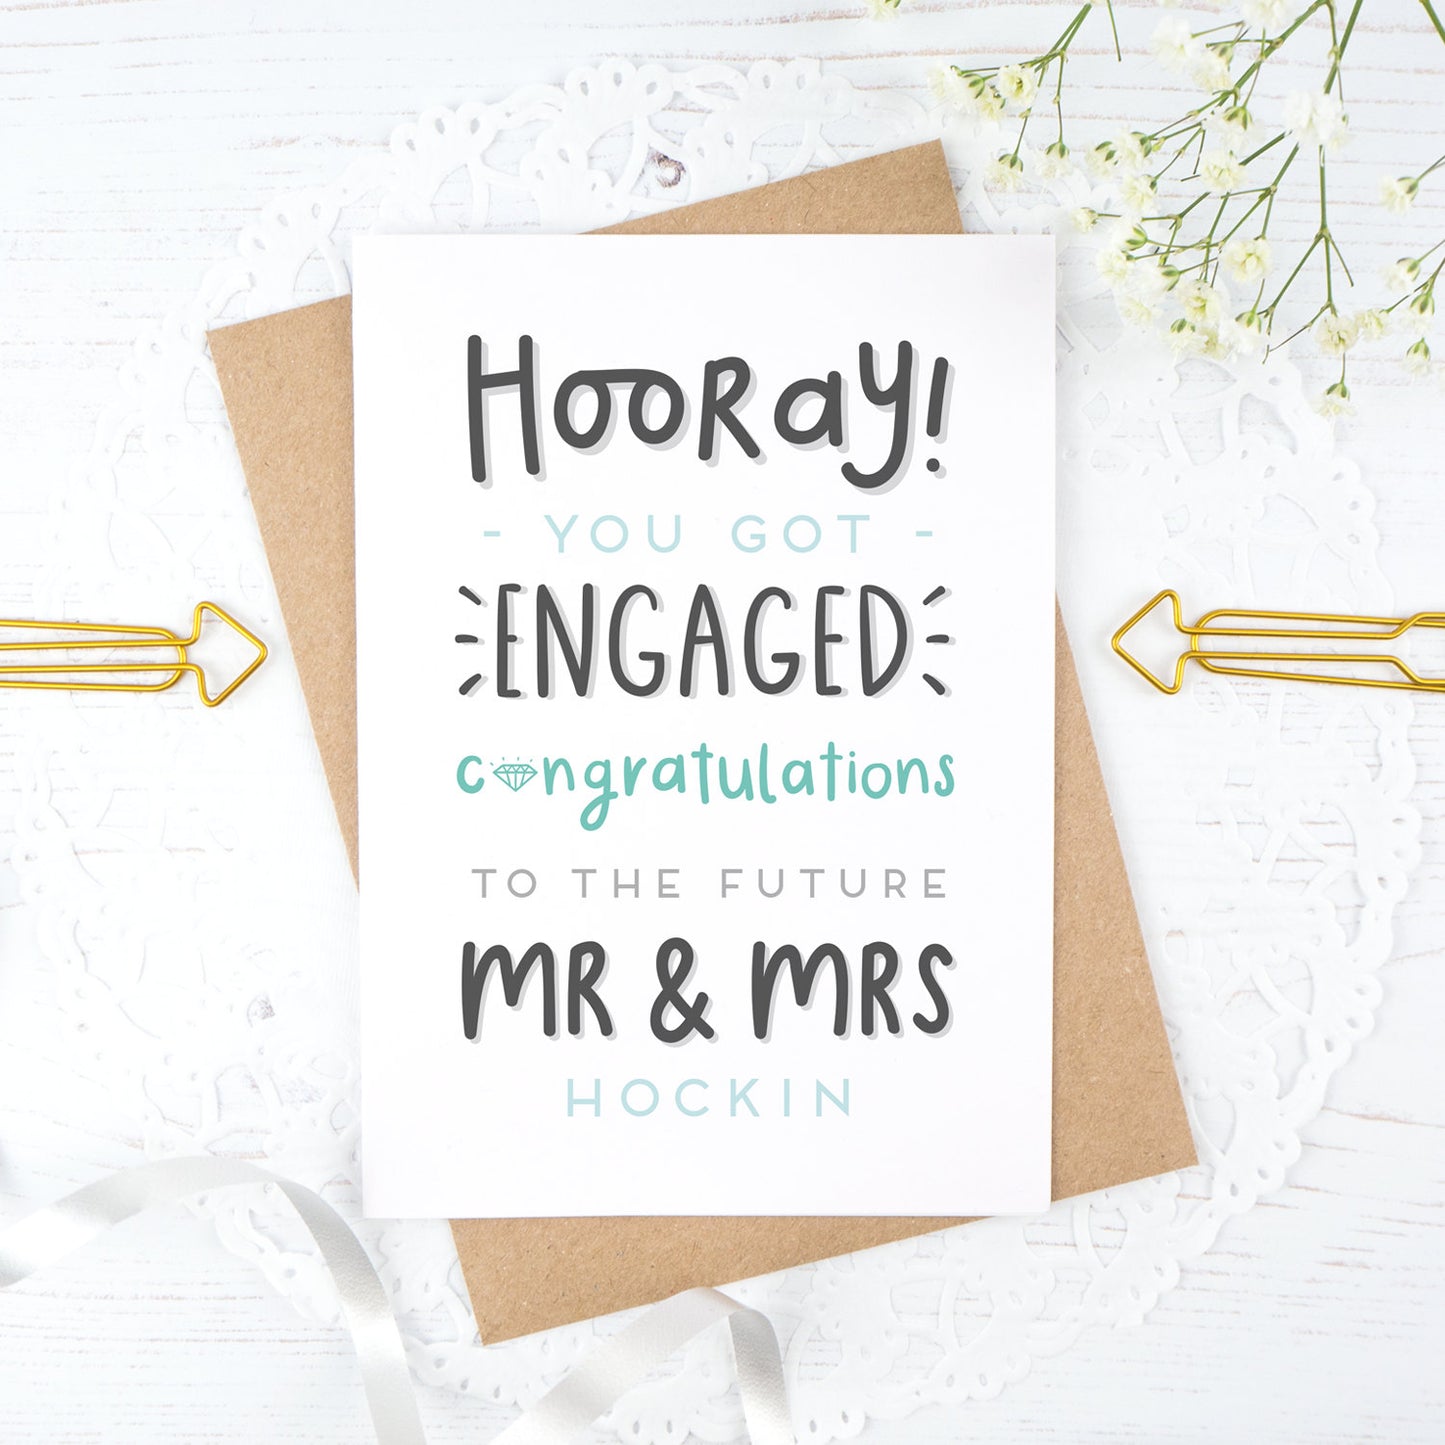 Hooray you got engaged! - Personalised Mr & Mrs engagement card in blue